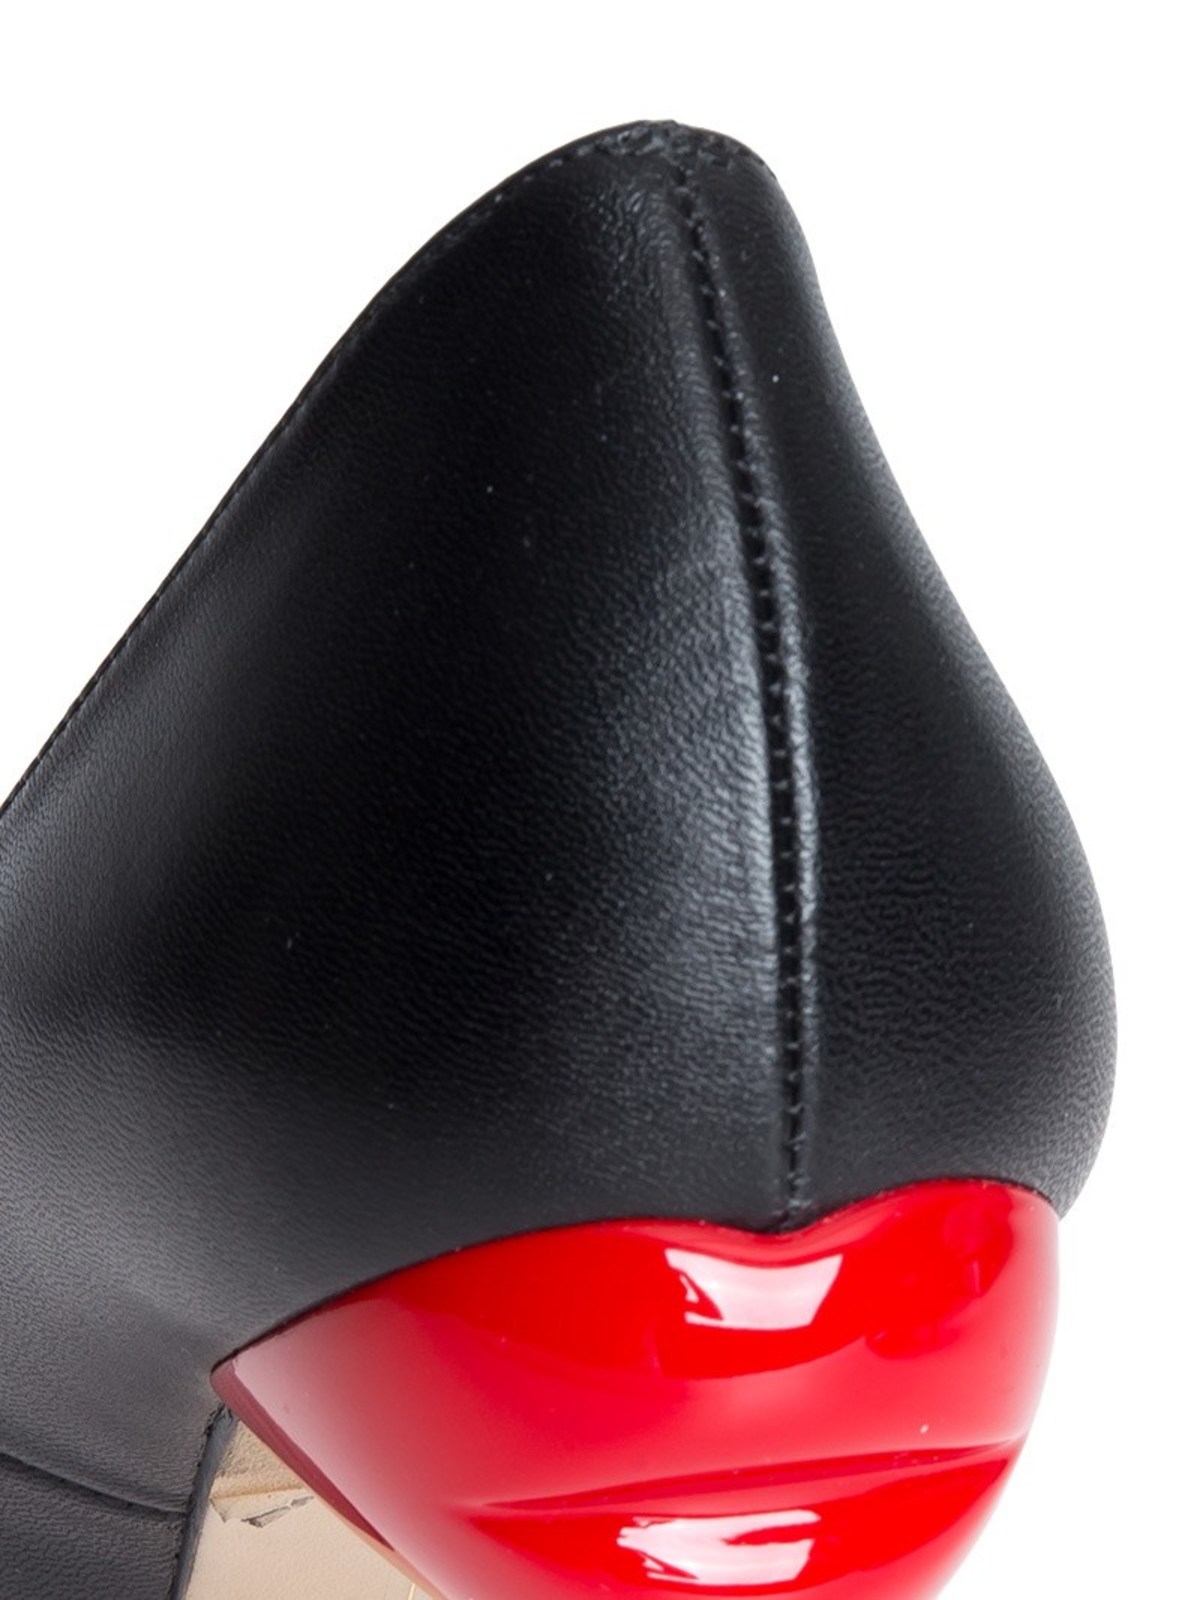 Shop Lulu Guinness Leather Pumps In Negro